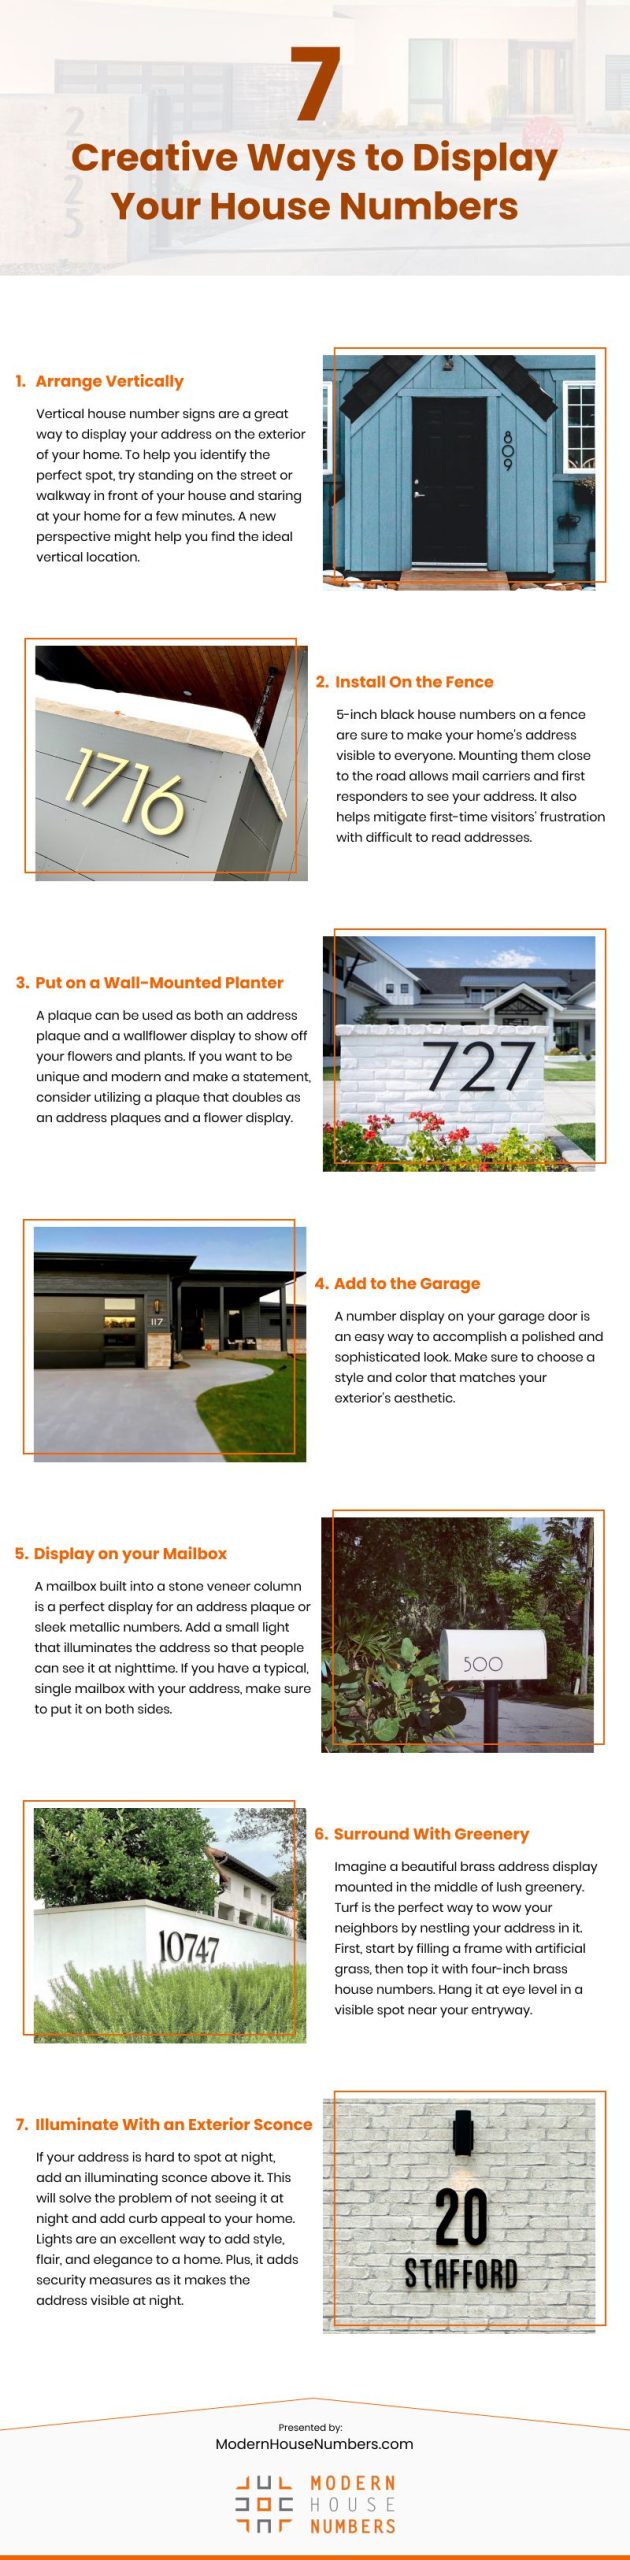 7 Creative Ways to Display Your House Numbers Infographic